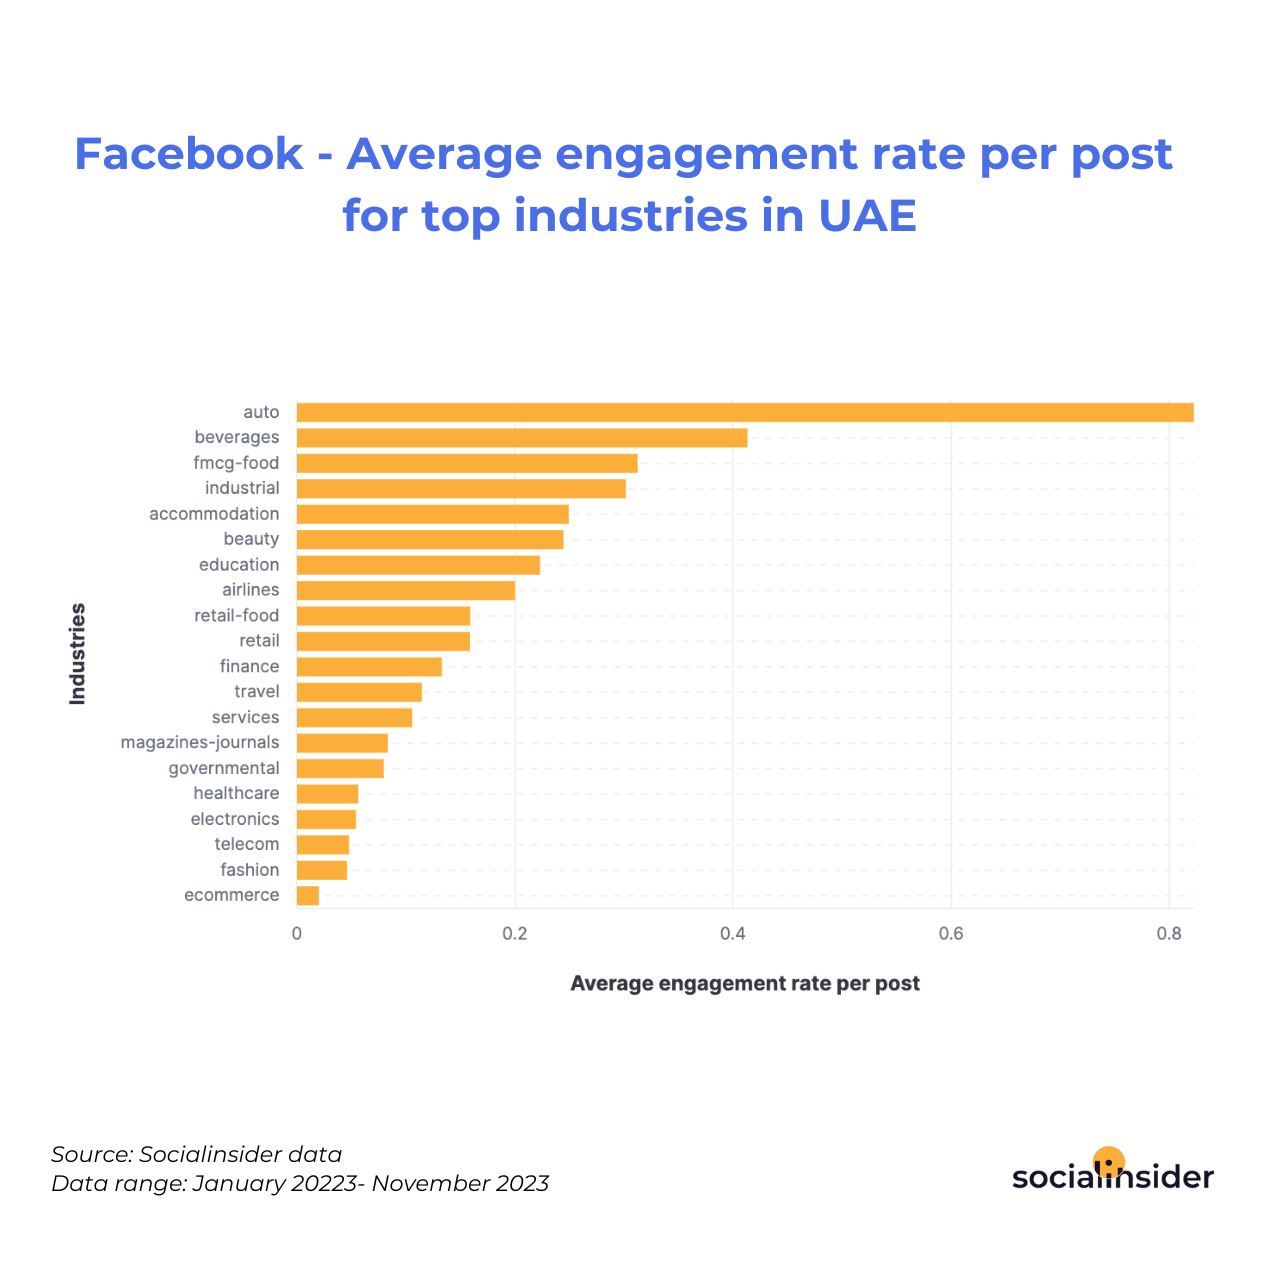 Facebook - Average engagement rate per post for top industries in UAE 